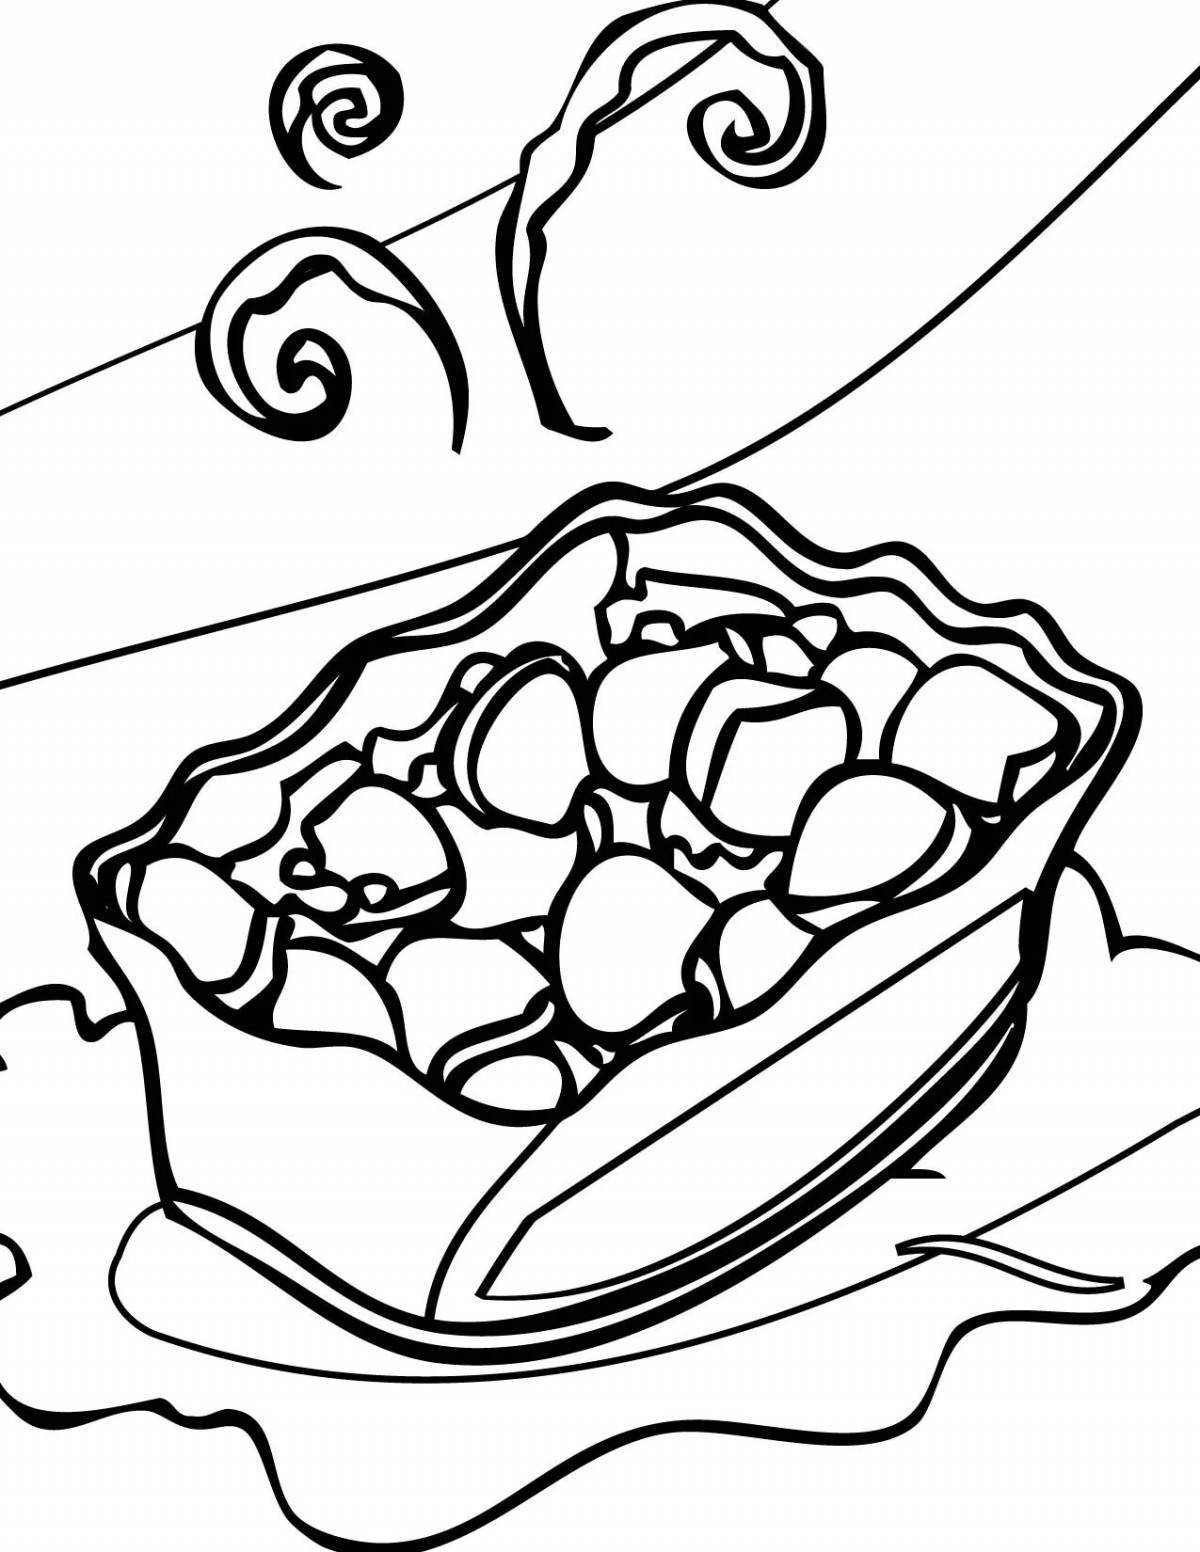 Color frenzy olivie coloring page